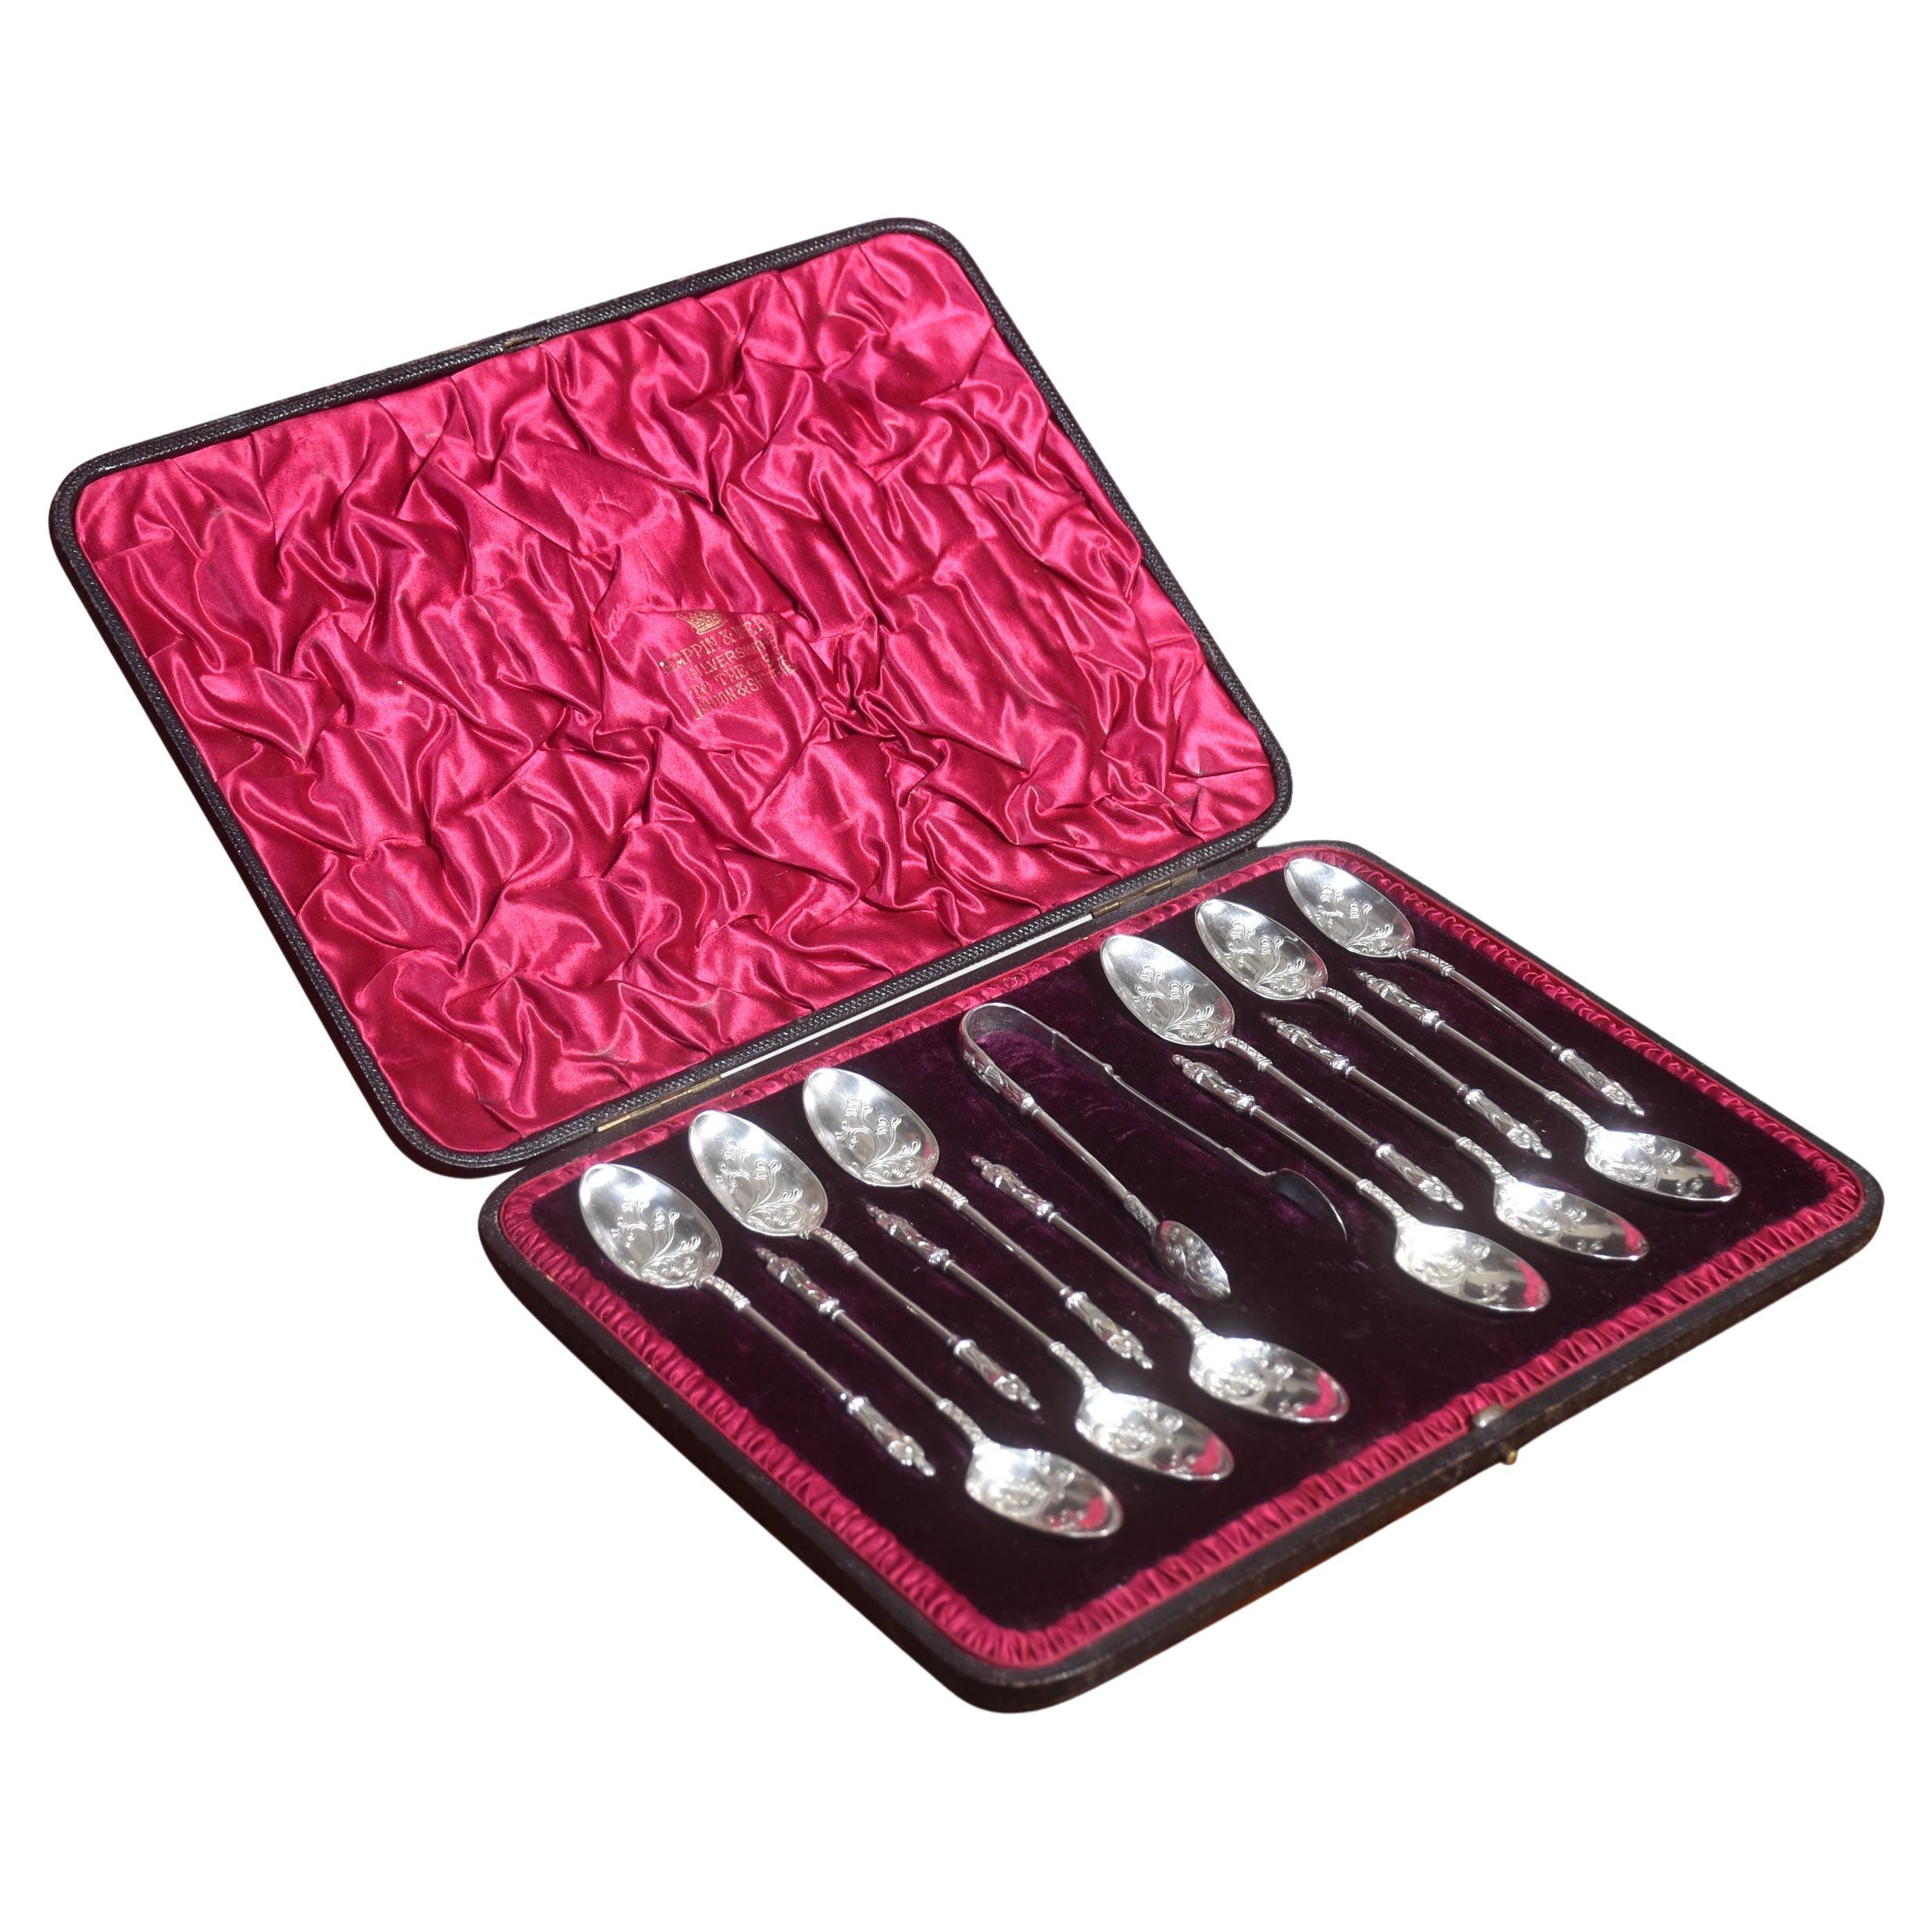 Mapping & Webb silver spoon set For Sale